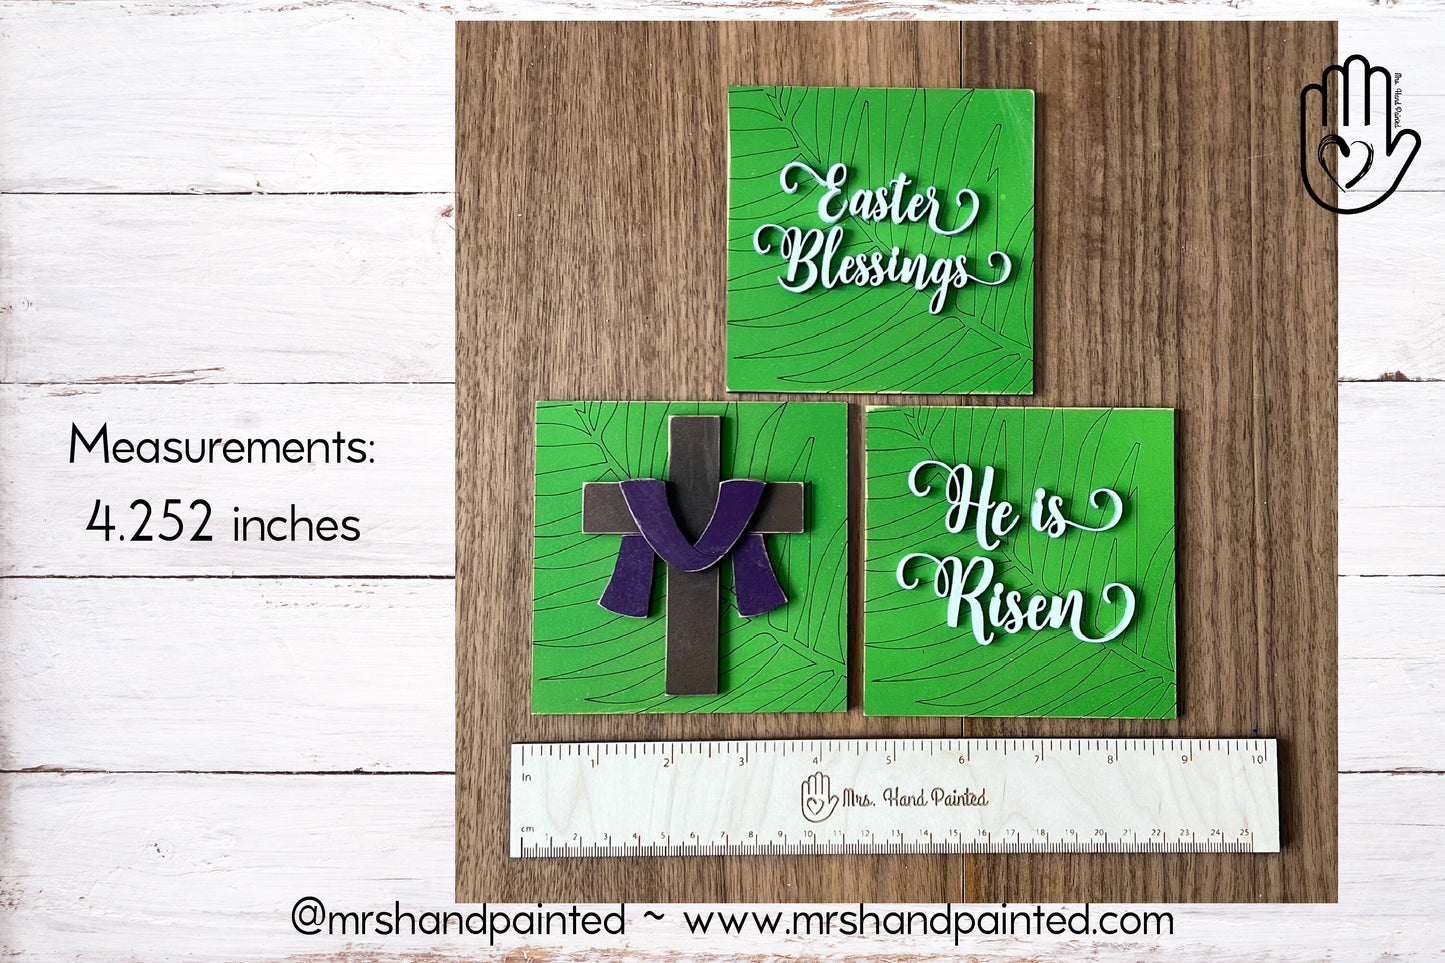 Easter Blessings Interchangeable Signs - Laser Cut Wood Painted